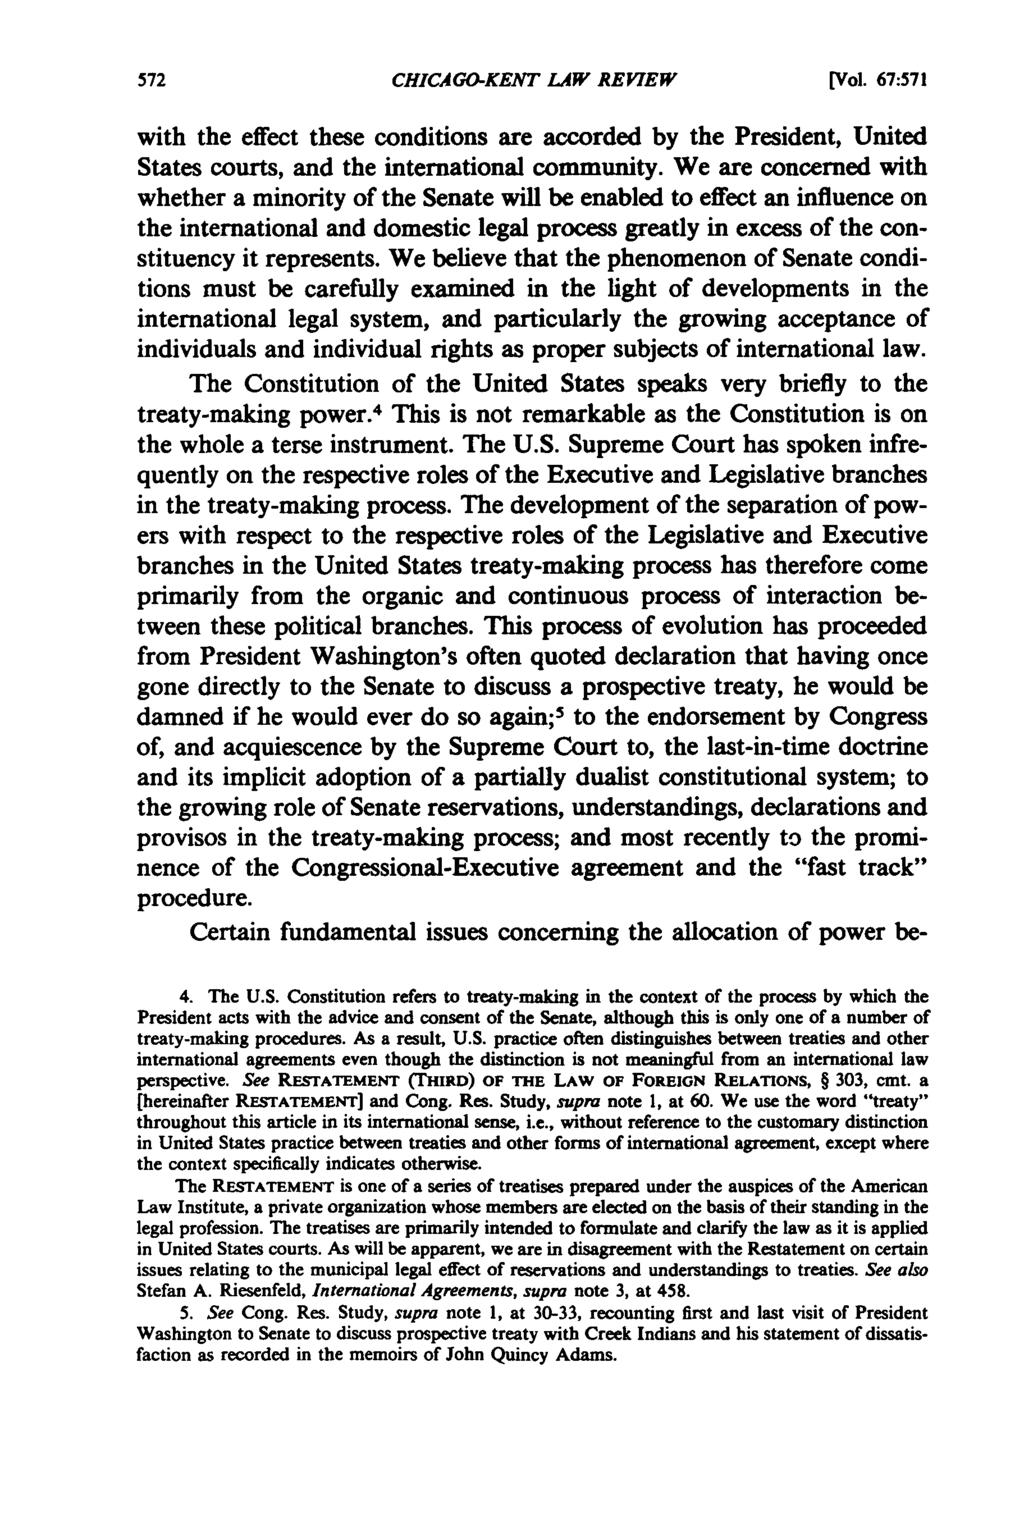 CHICAGO-KENT LAW REVIEW [Vol. 67:571 with the effect these conditions are accorded by the President, United States courts, and the international community.